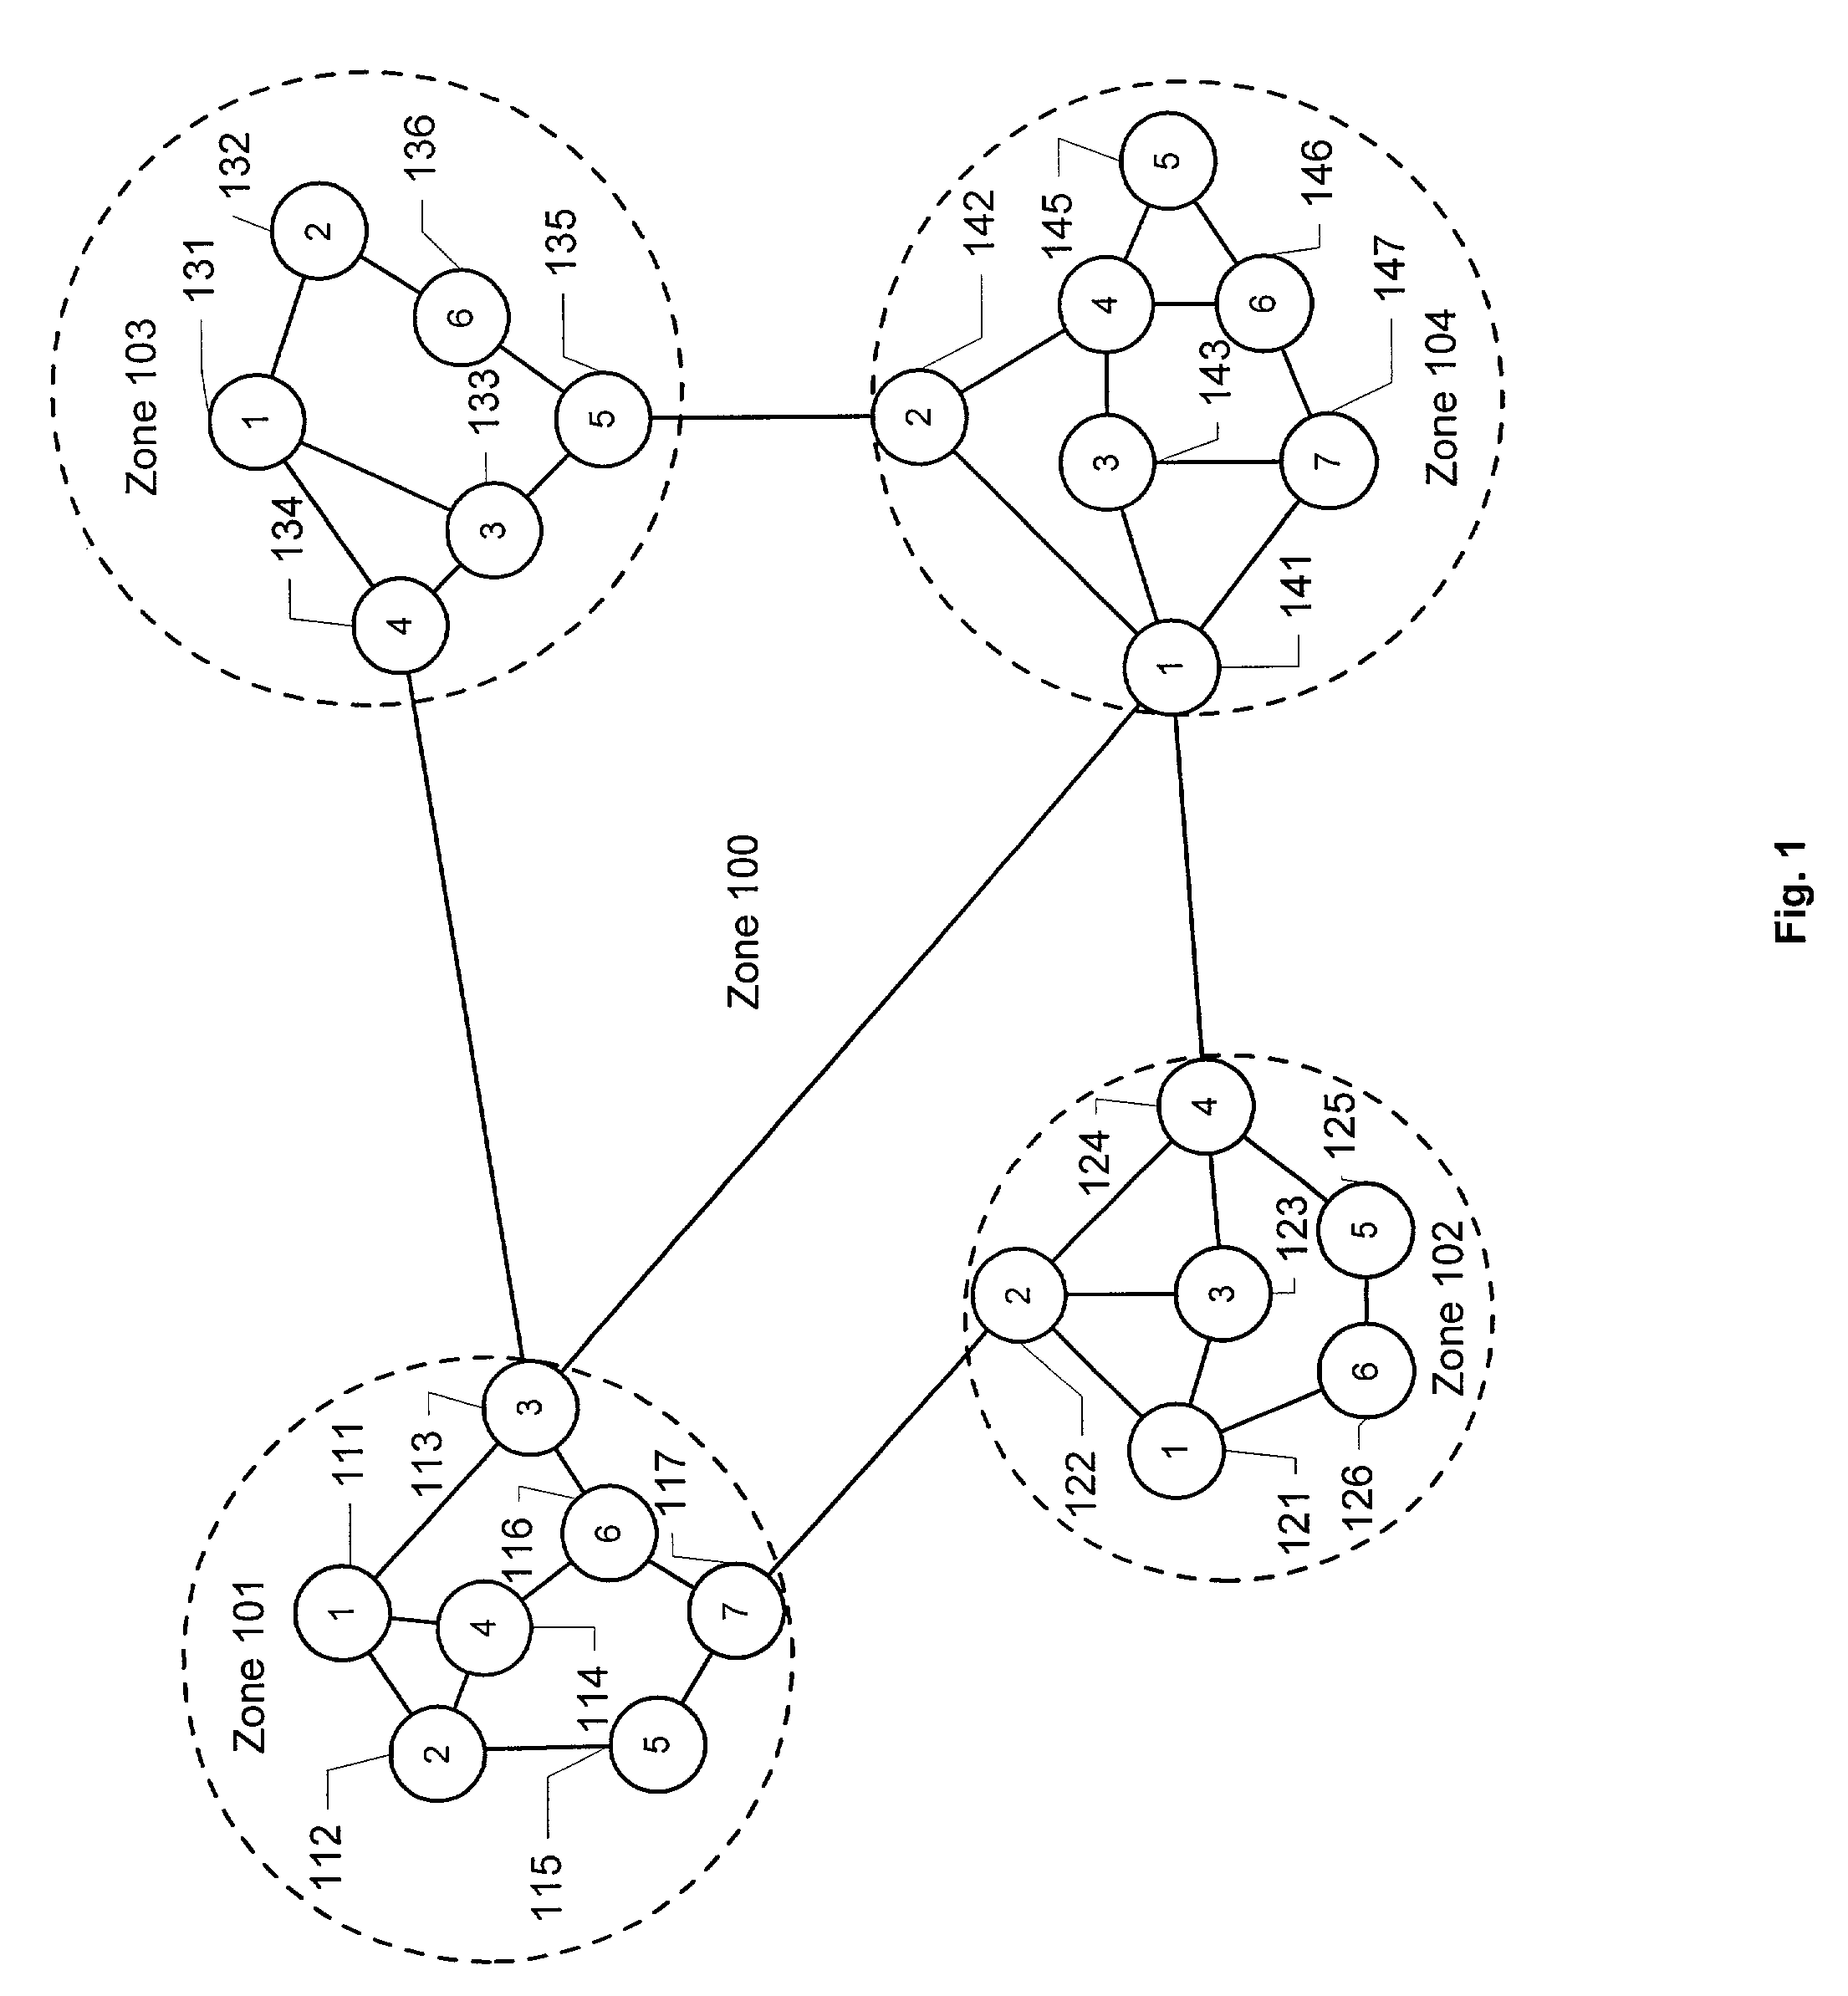 Resource reservation scheme for path restoration in an optical network